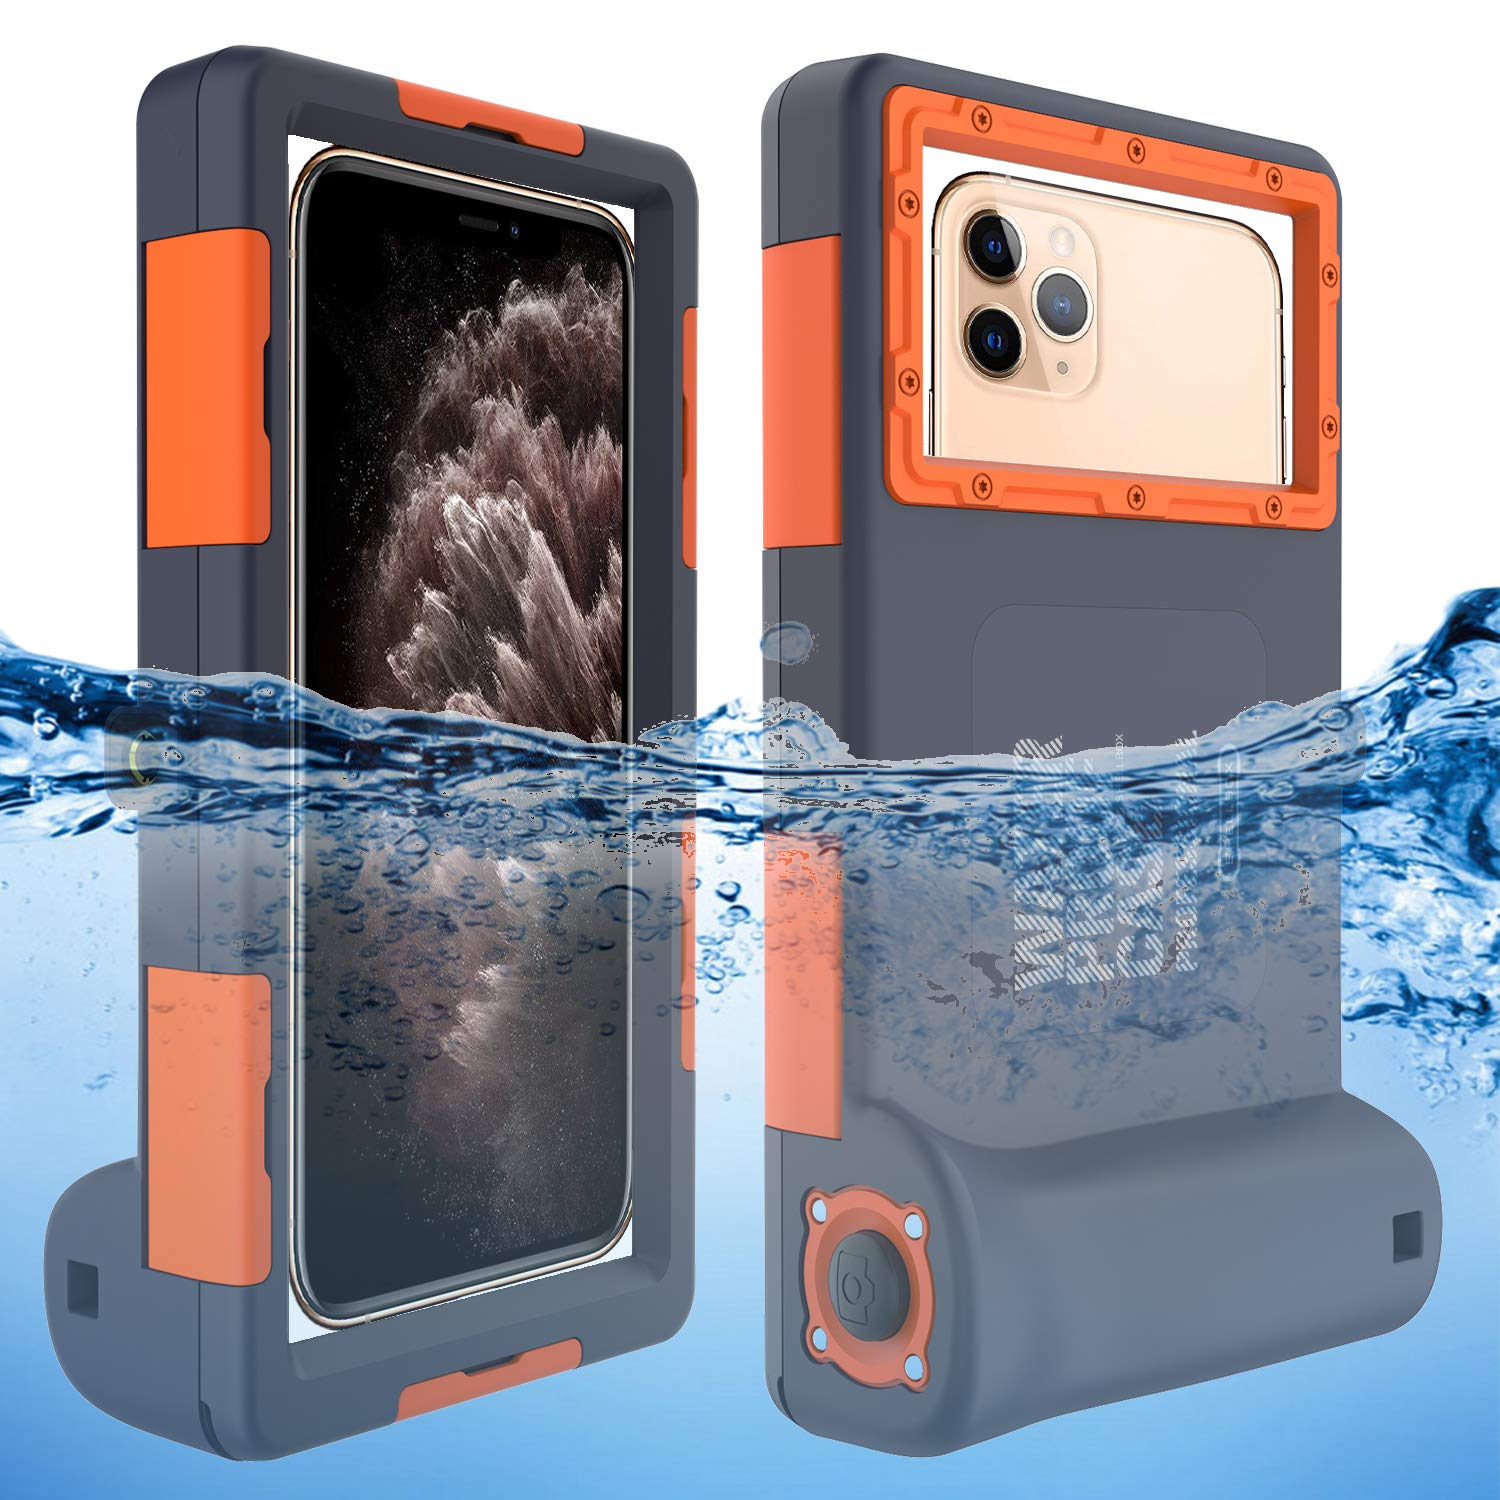 Willbox Professional [15m/50ft] Diving Surfing Swimming Snorkeling Photo Video Waterproof Protective Case Underwater Housing for Galaxy and iPhone Series Smartphones with Lanyard (Orange)